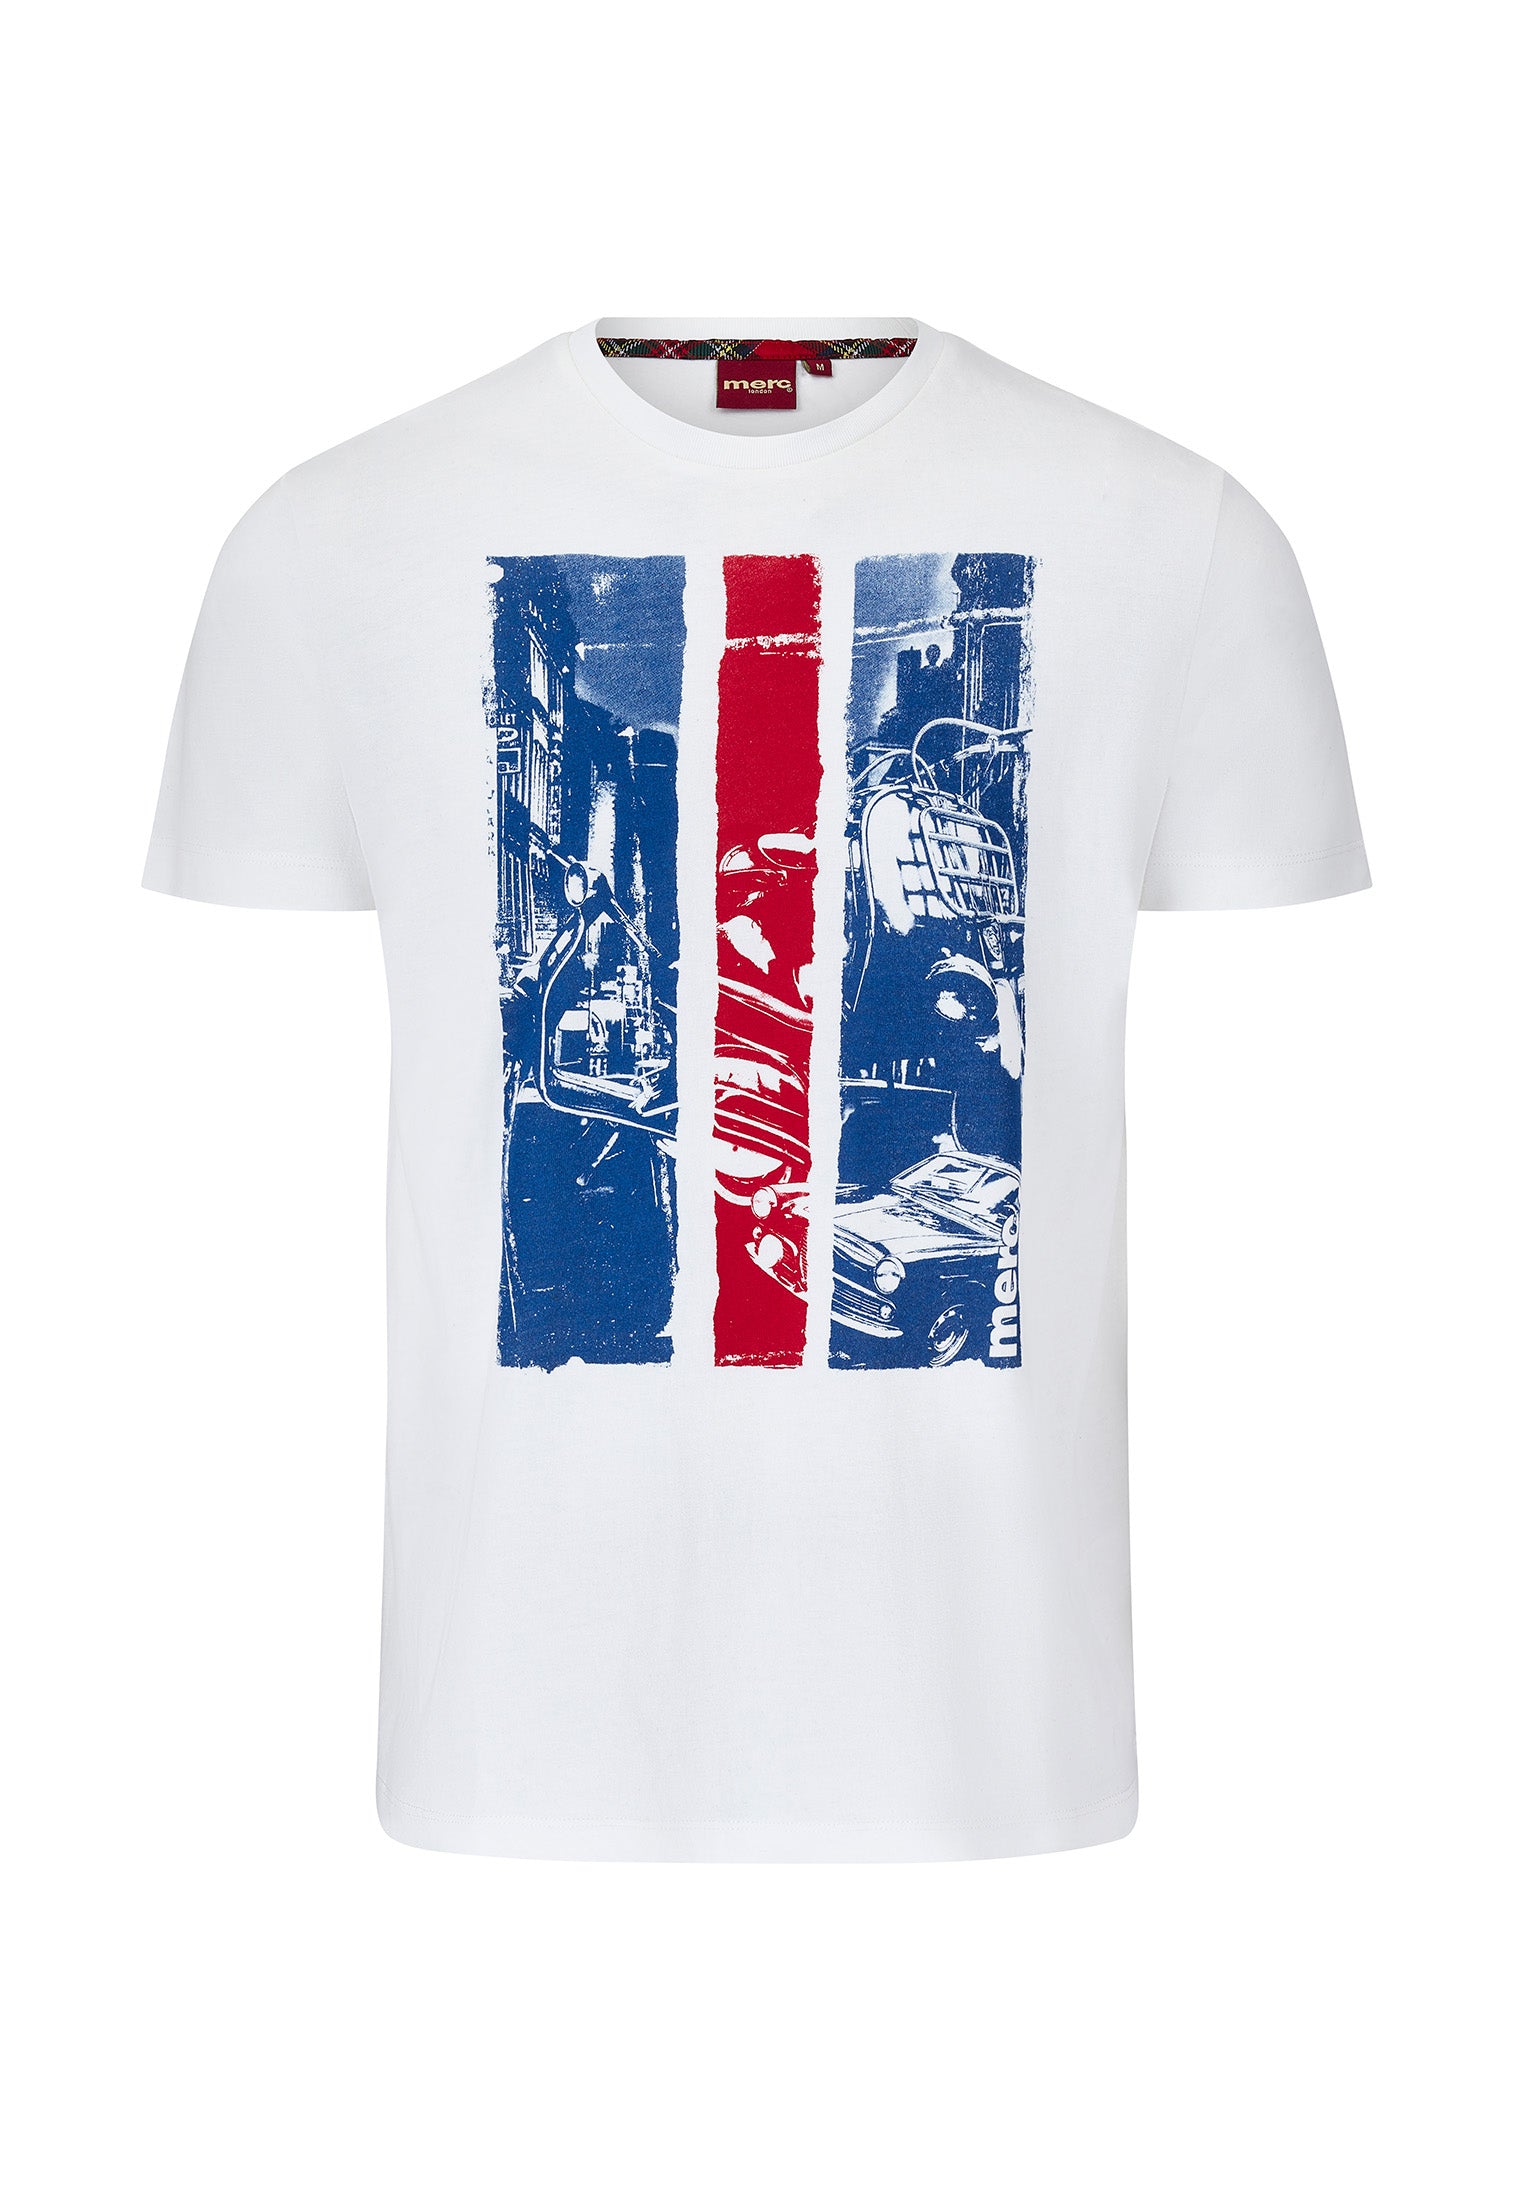 Printed Mens T-Shirt by Merc in White